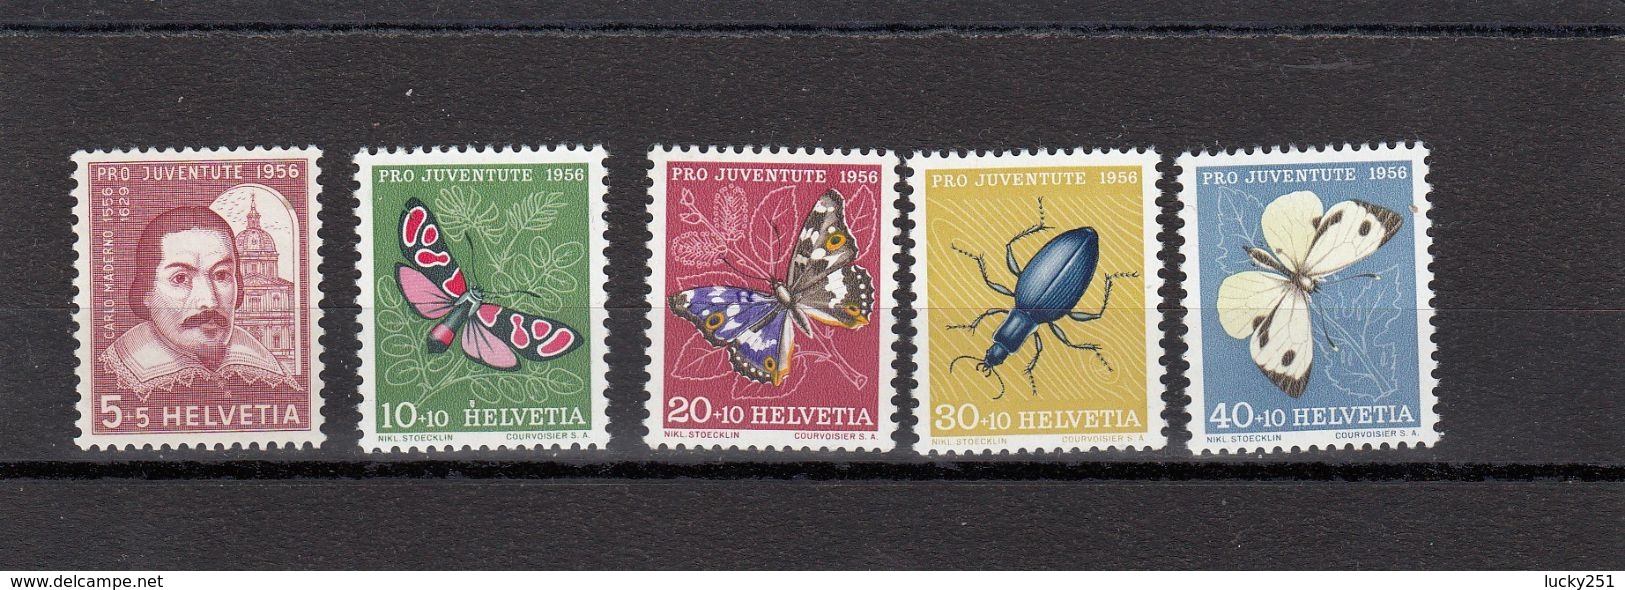 Suisse - Année 1956 - Neuf** - Pro Juventute - N°Zumstein 163/67** - Portrait De C Maderno Et Insectes - Unused Stamps